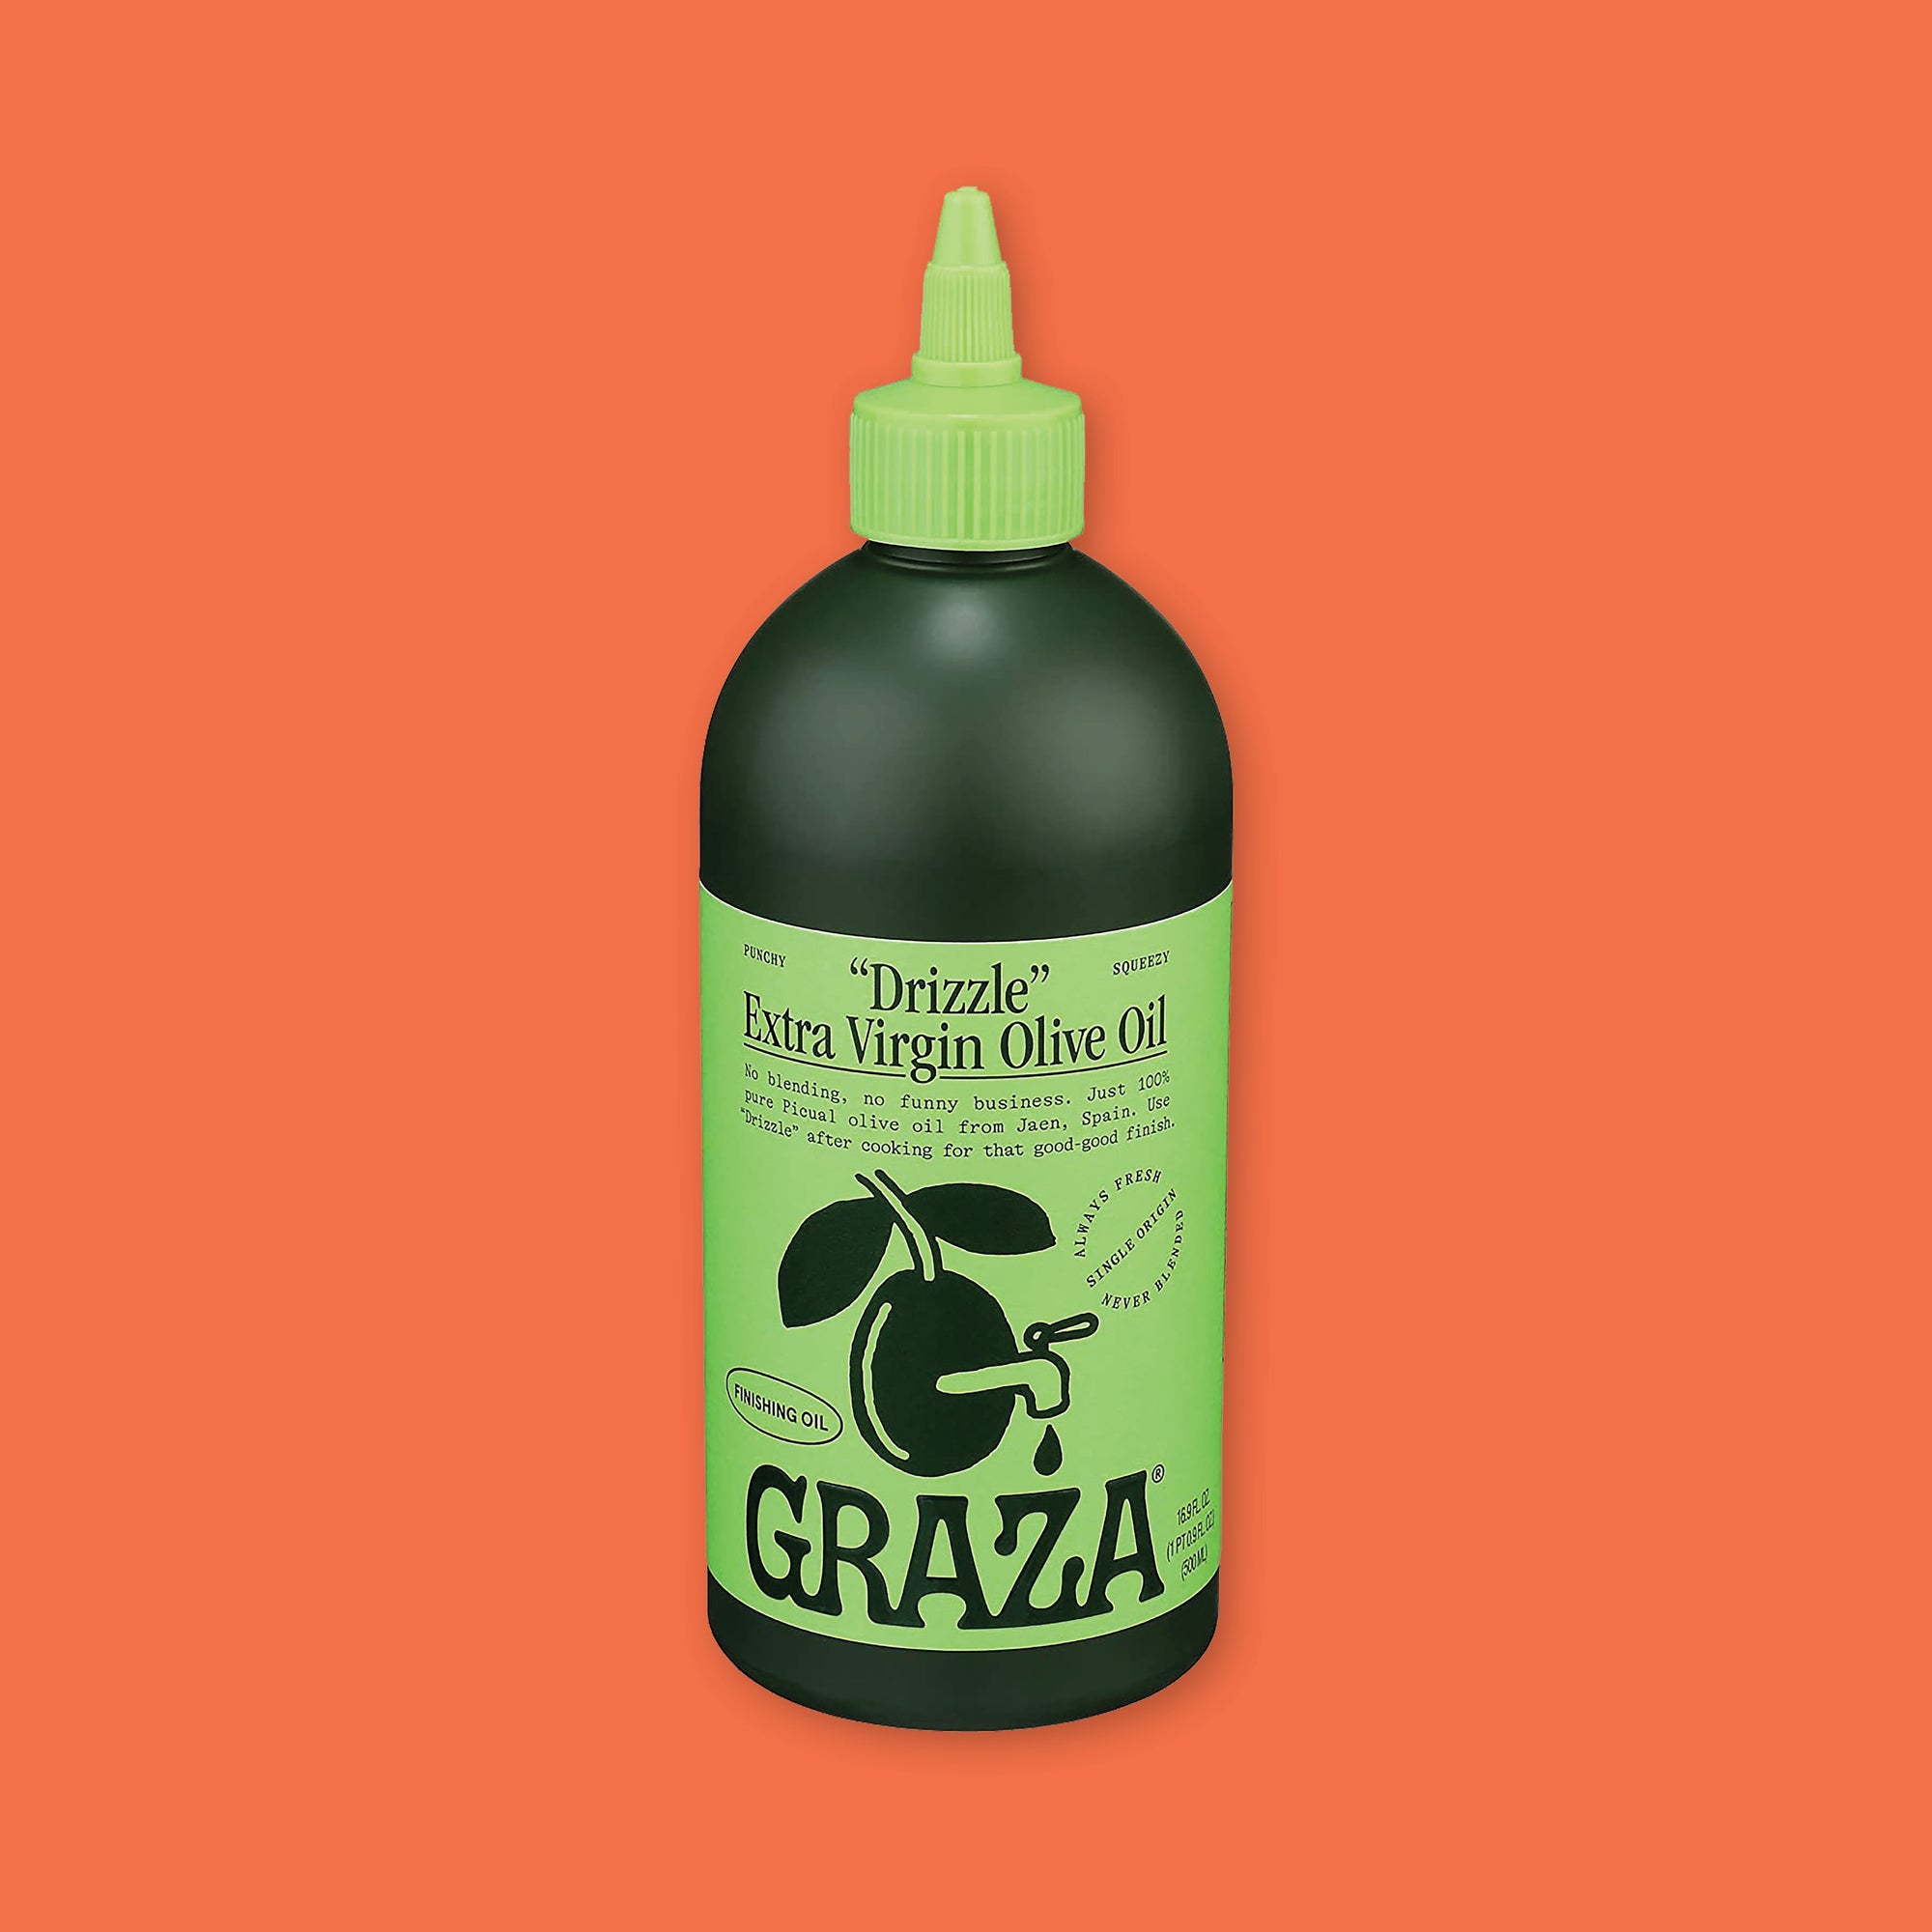 On an orangey-red background sits a bottle. This dark green bottle has a lime green cap and label. It says ""Drizzle" Extra Virgin Olive Oil" in black, serif font. It is "PUNCHY" AND "SQUEEZY". It has an illustration of an olive branch with a spout on the olive in black. It says "ALWAYS FRESH NEVER BLENDED SINGLE ORIGIN" and "FINISHING OIL" and "GRAZA" at the bottom in black, handwritten lettering. 16.9 fl oz (500 ml)